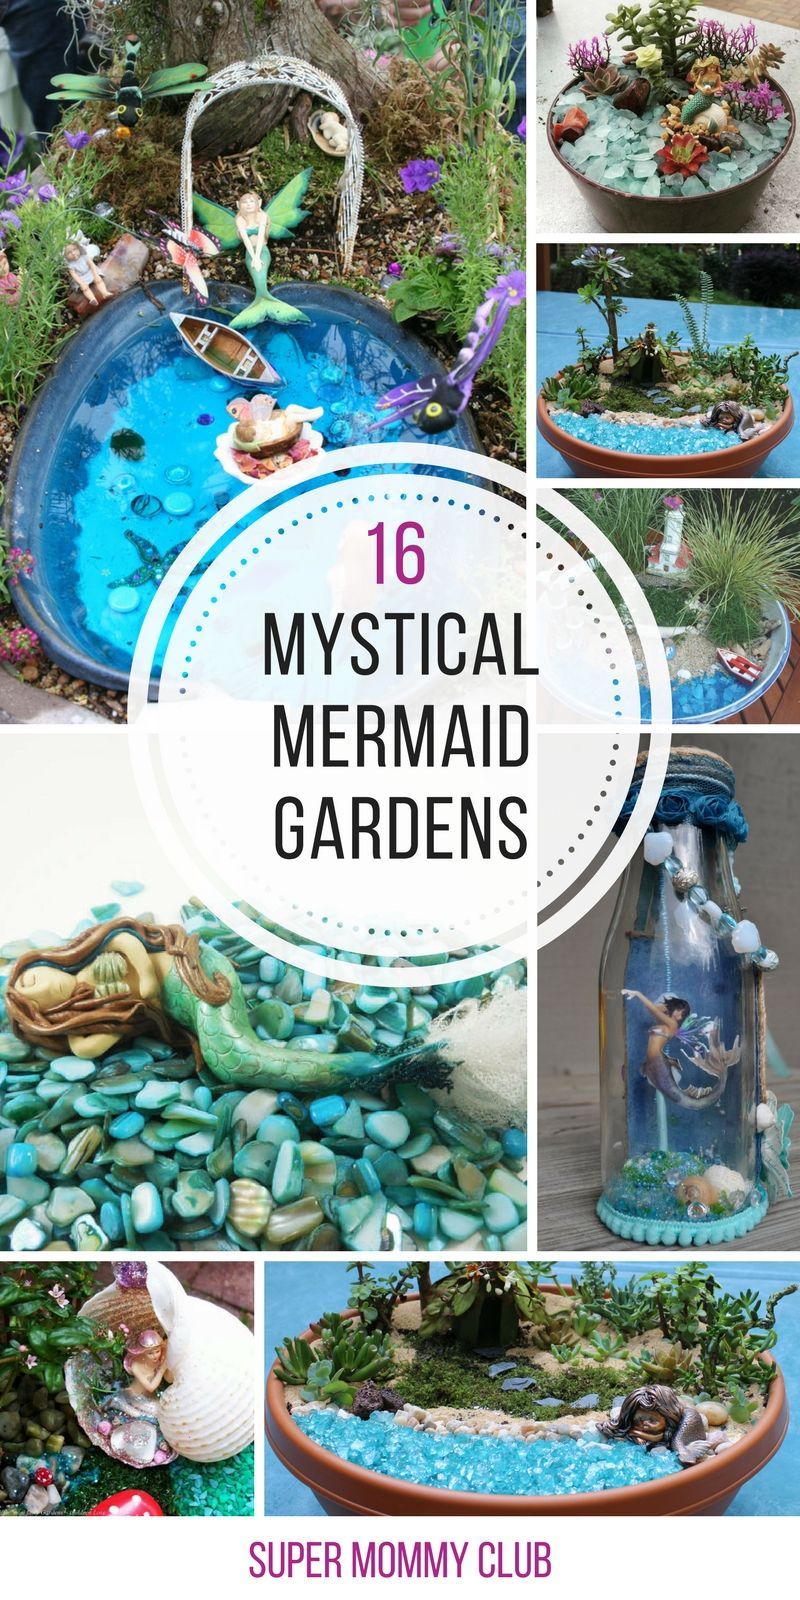 Loving these mermaid garden ideas – now we can make sea fairy gardens in our planters!